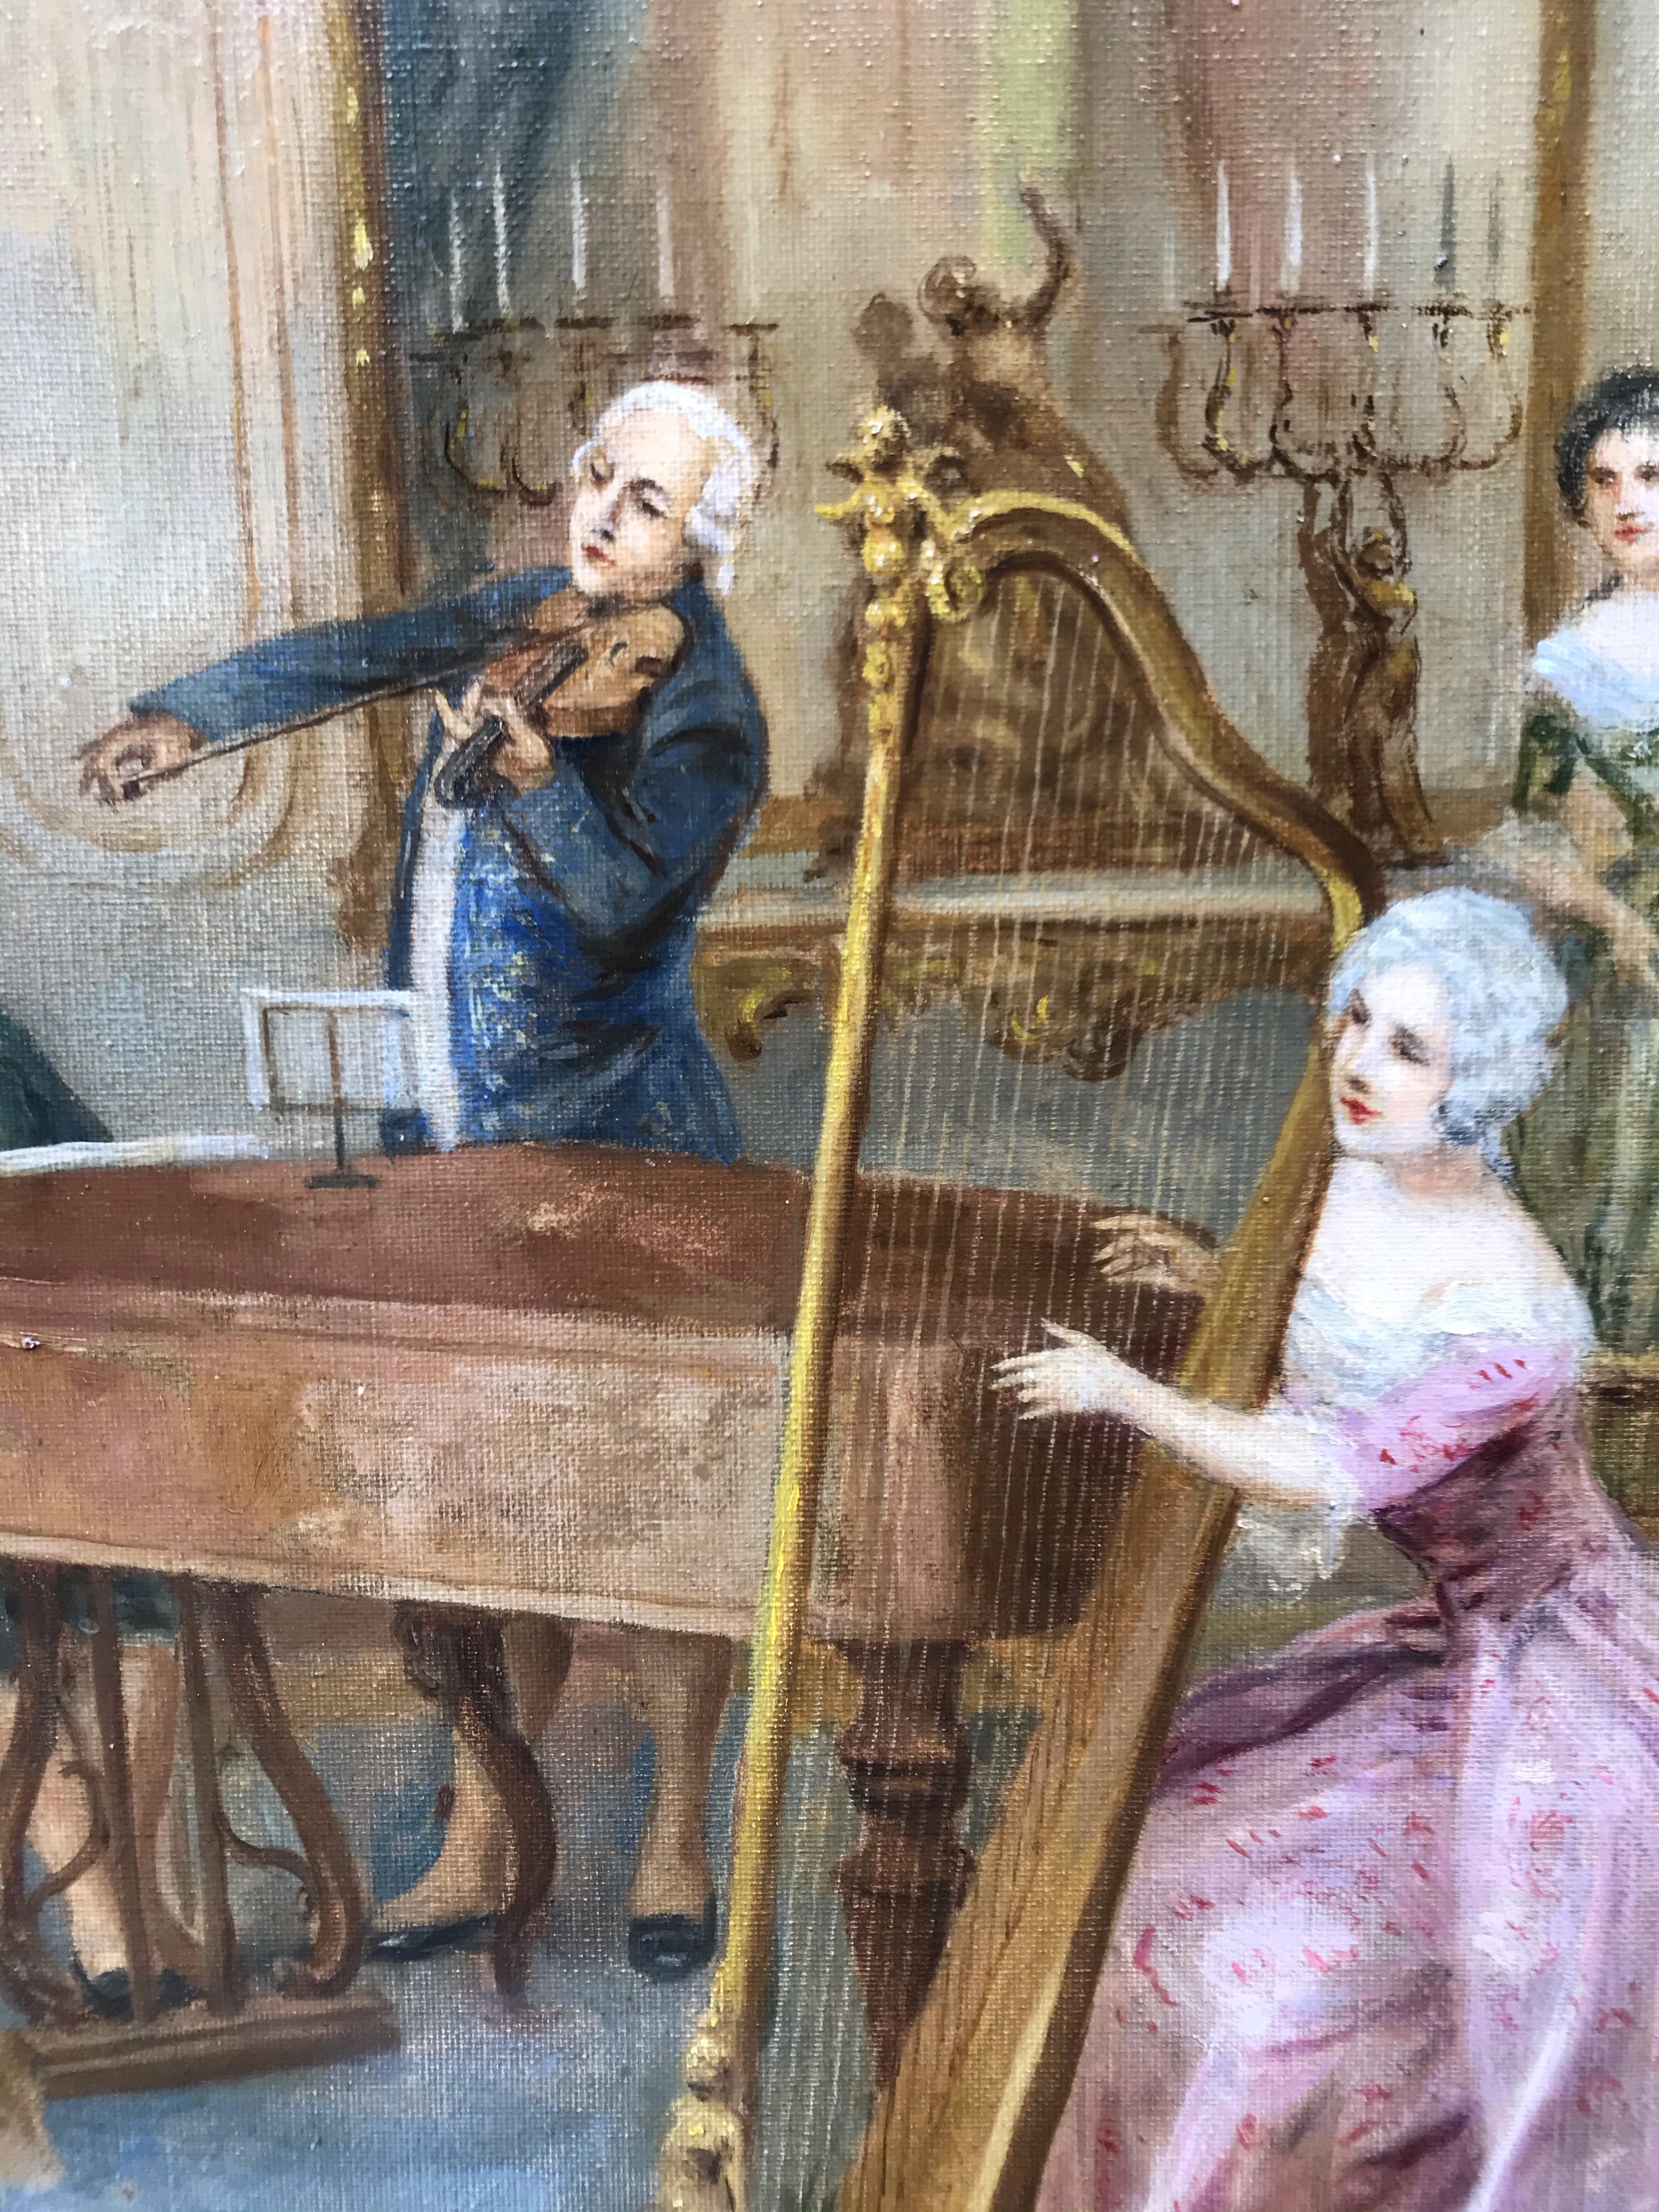 Private Music Concert in the 18th Century 11